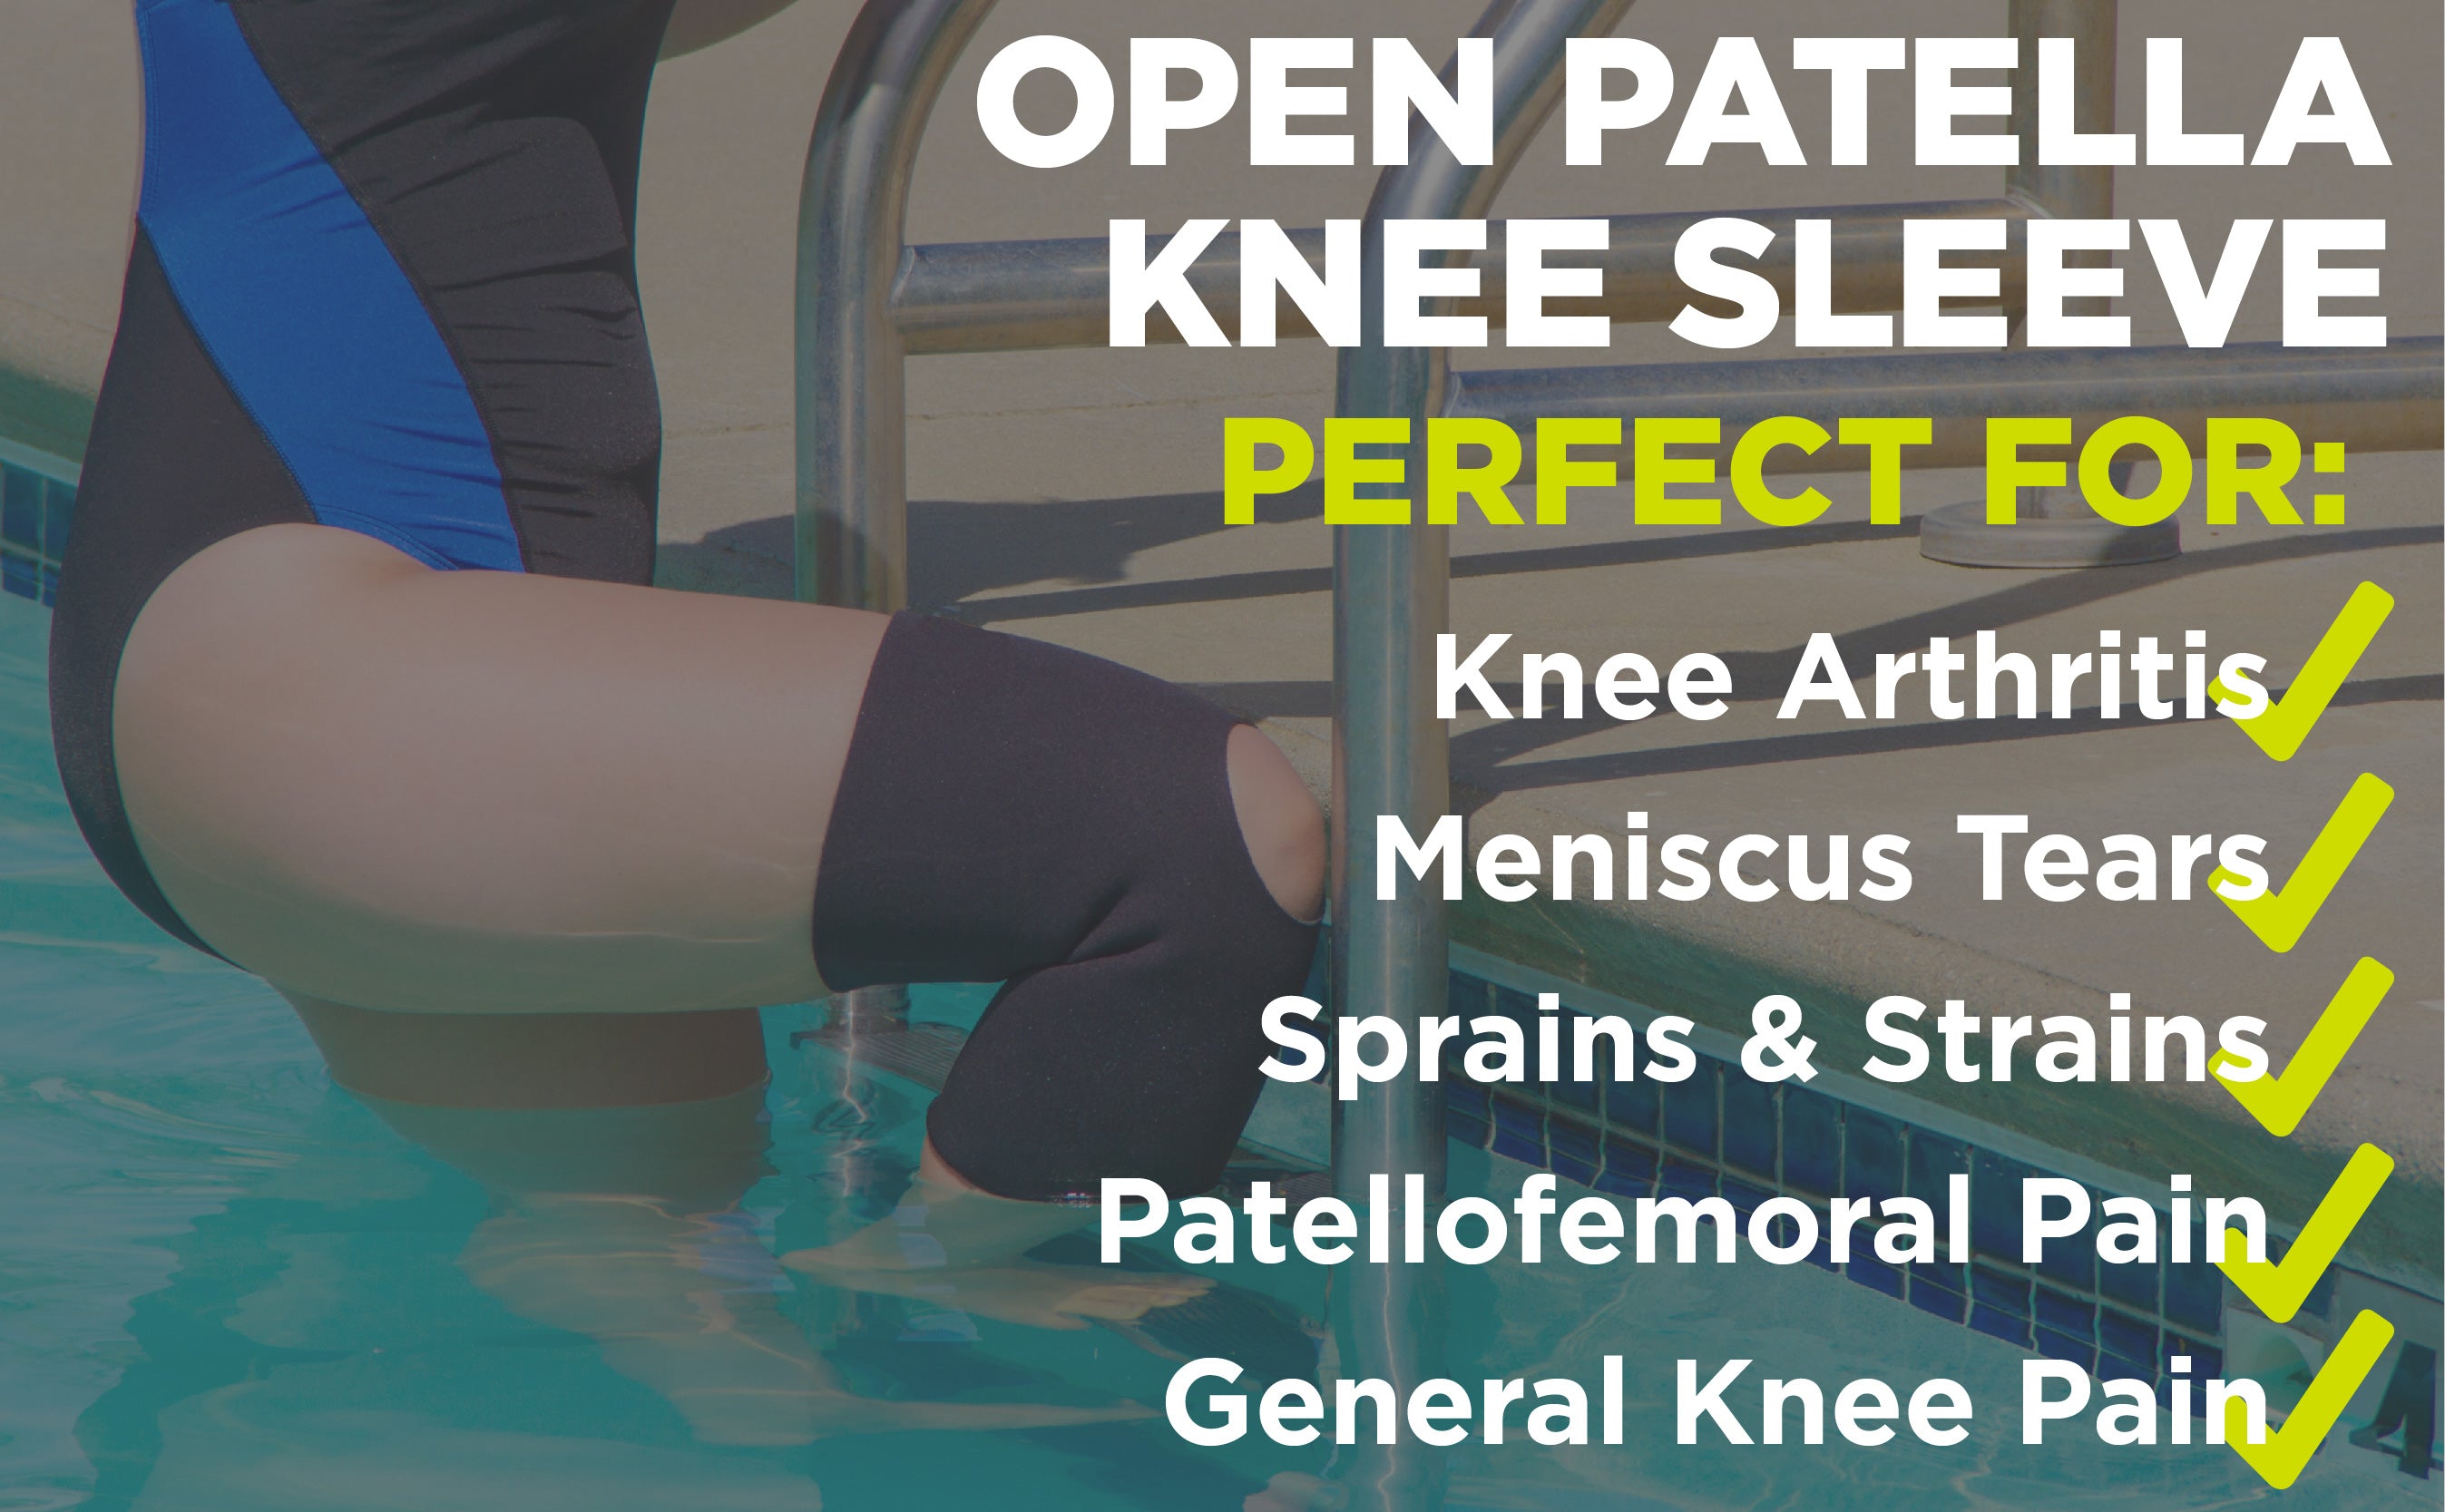 the open patella knee sleeve is great for arthritis even when in the pool